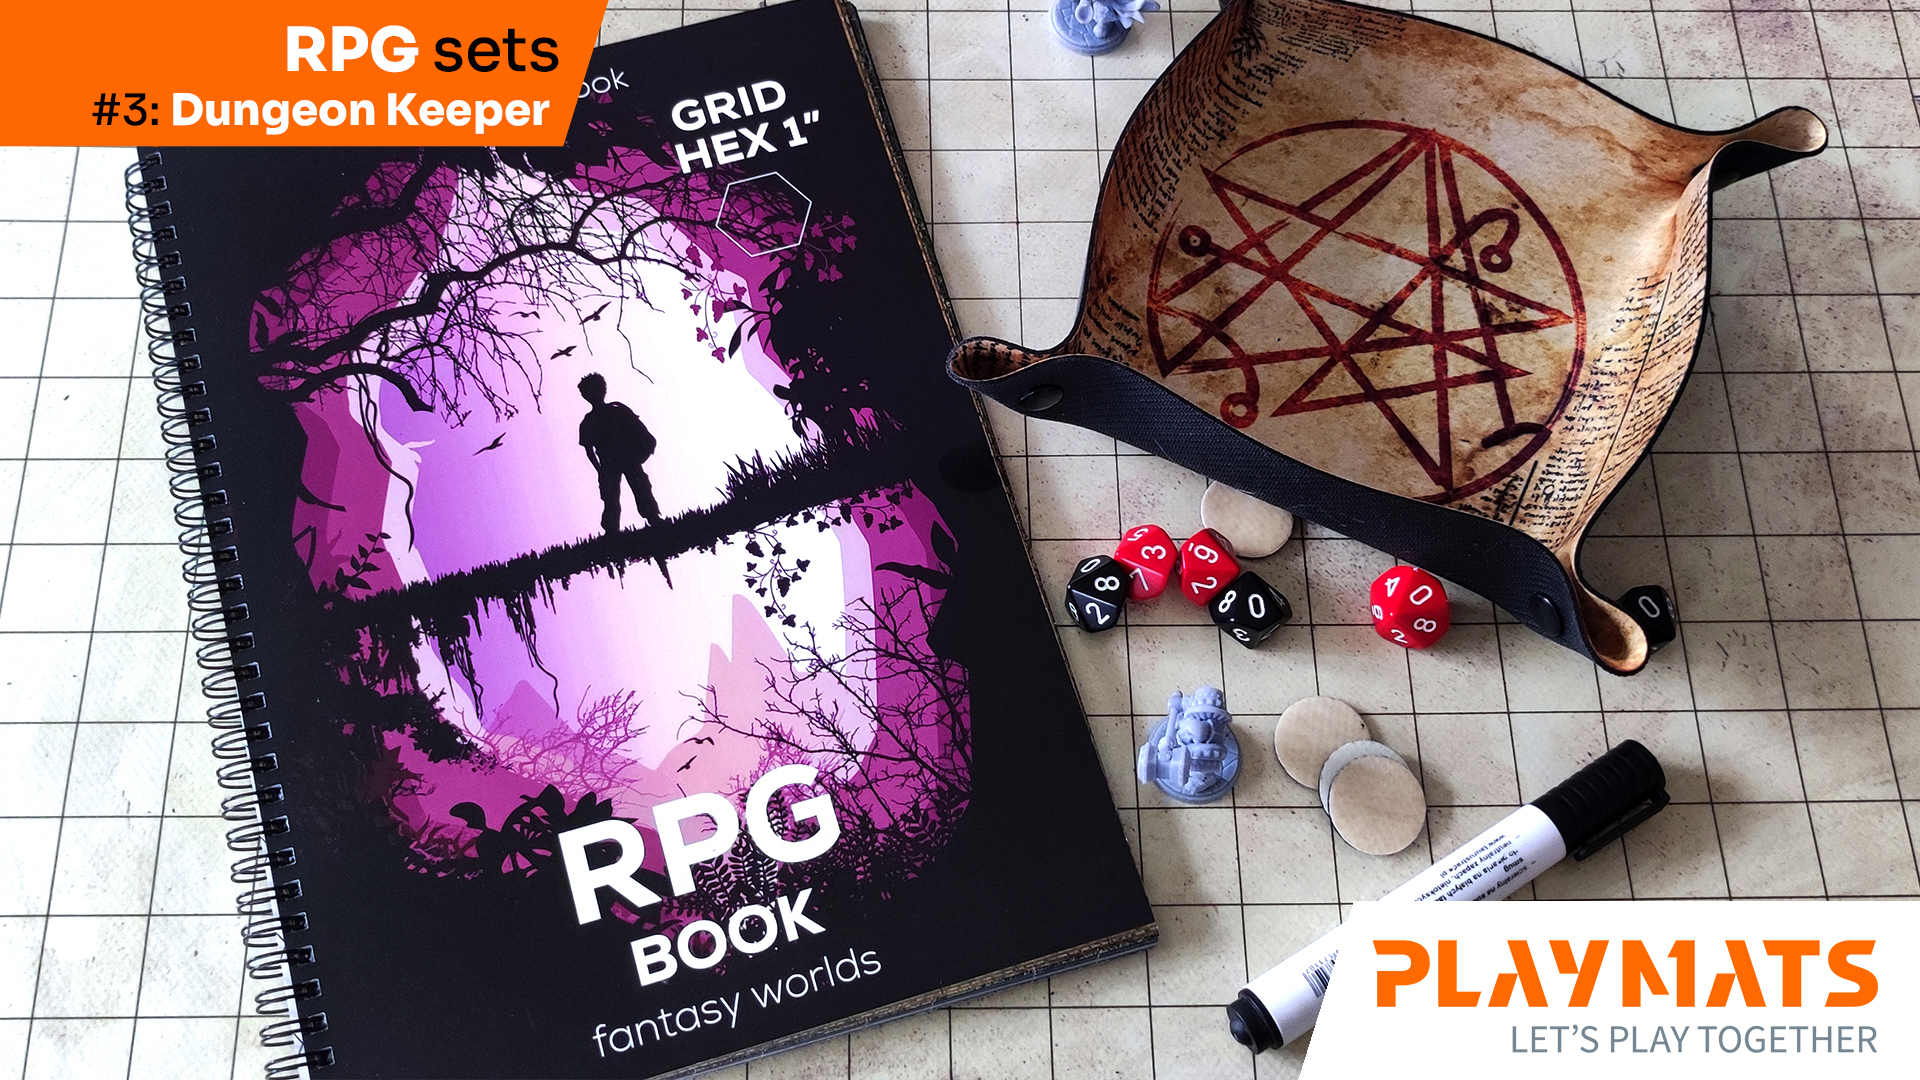 RPG games set 3 - Dungeon Keeper - RPG books with grids